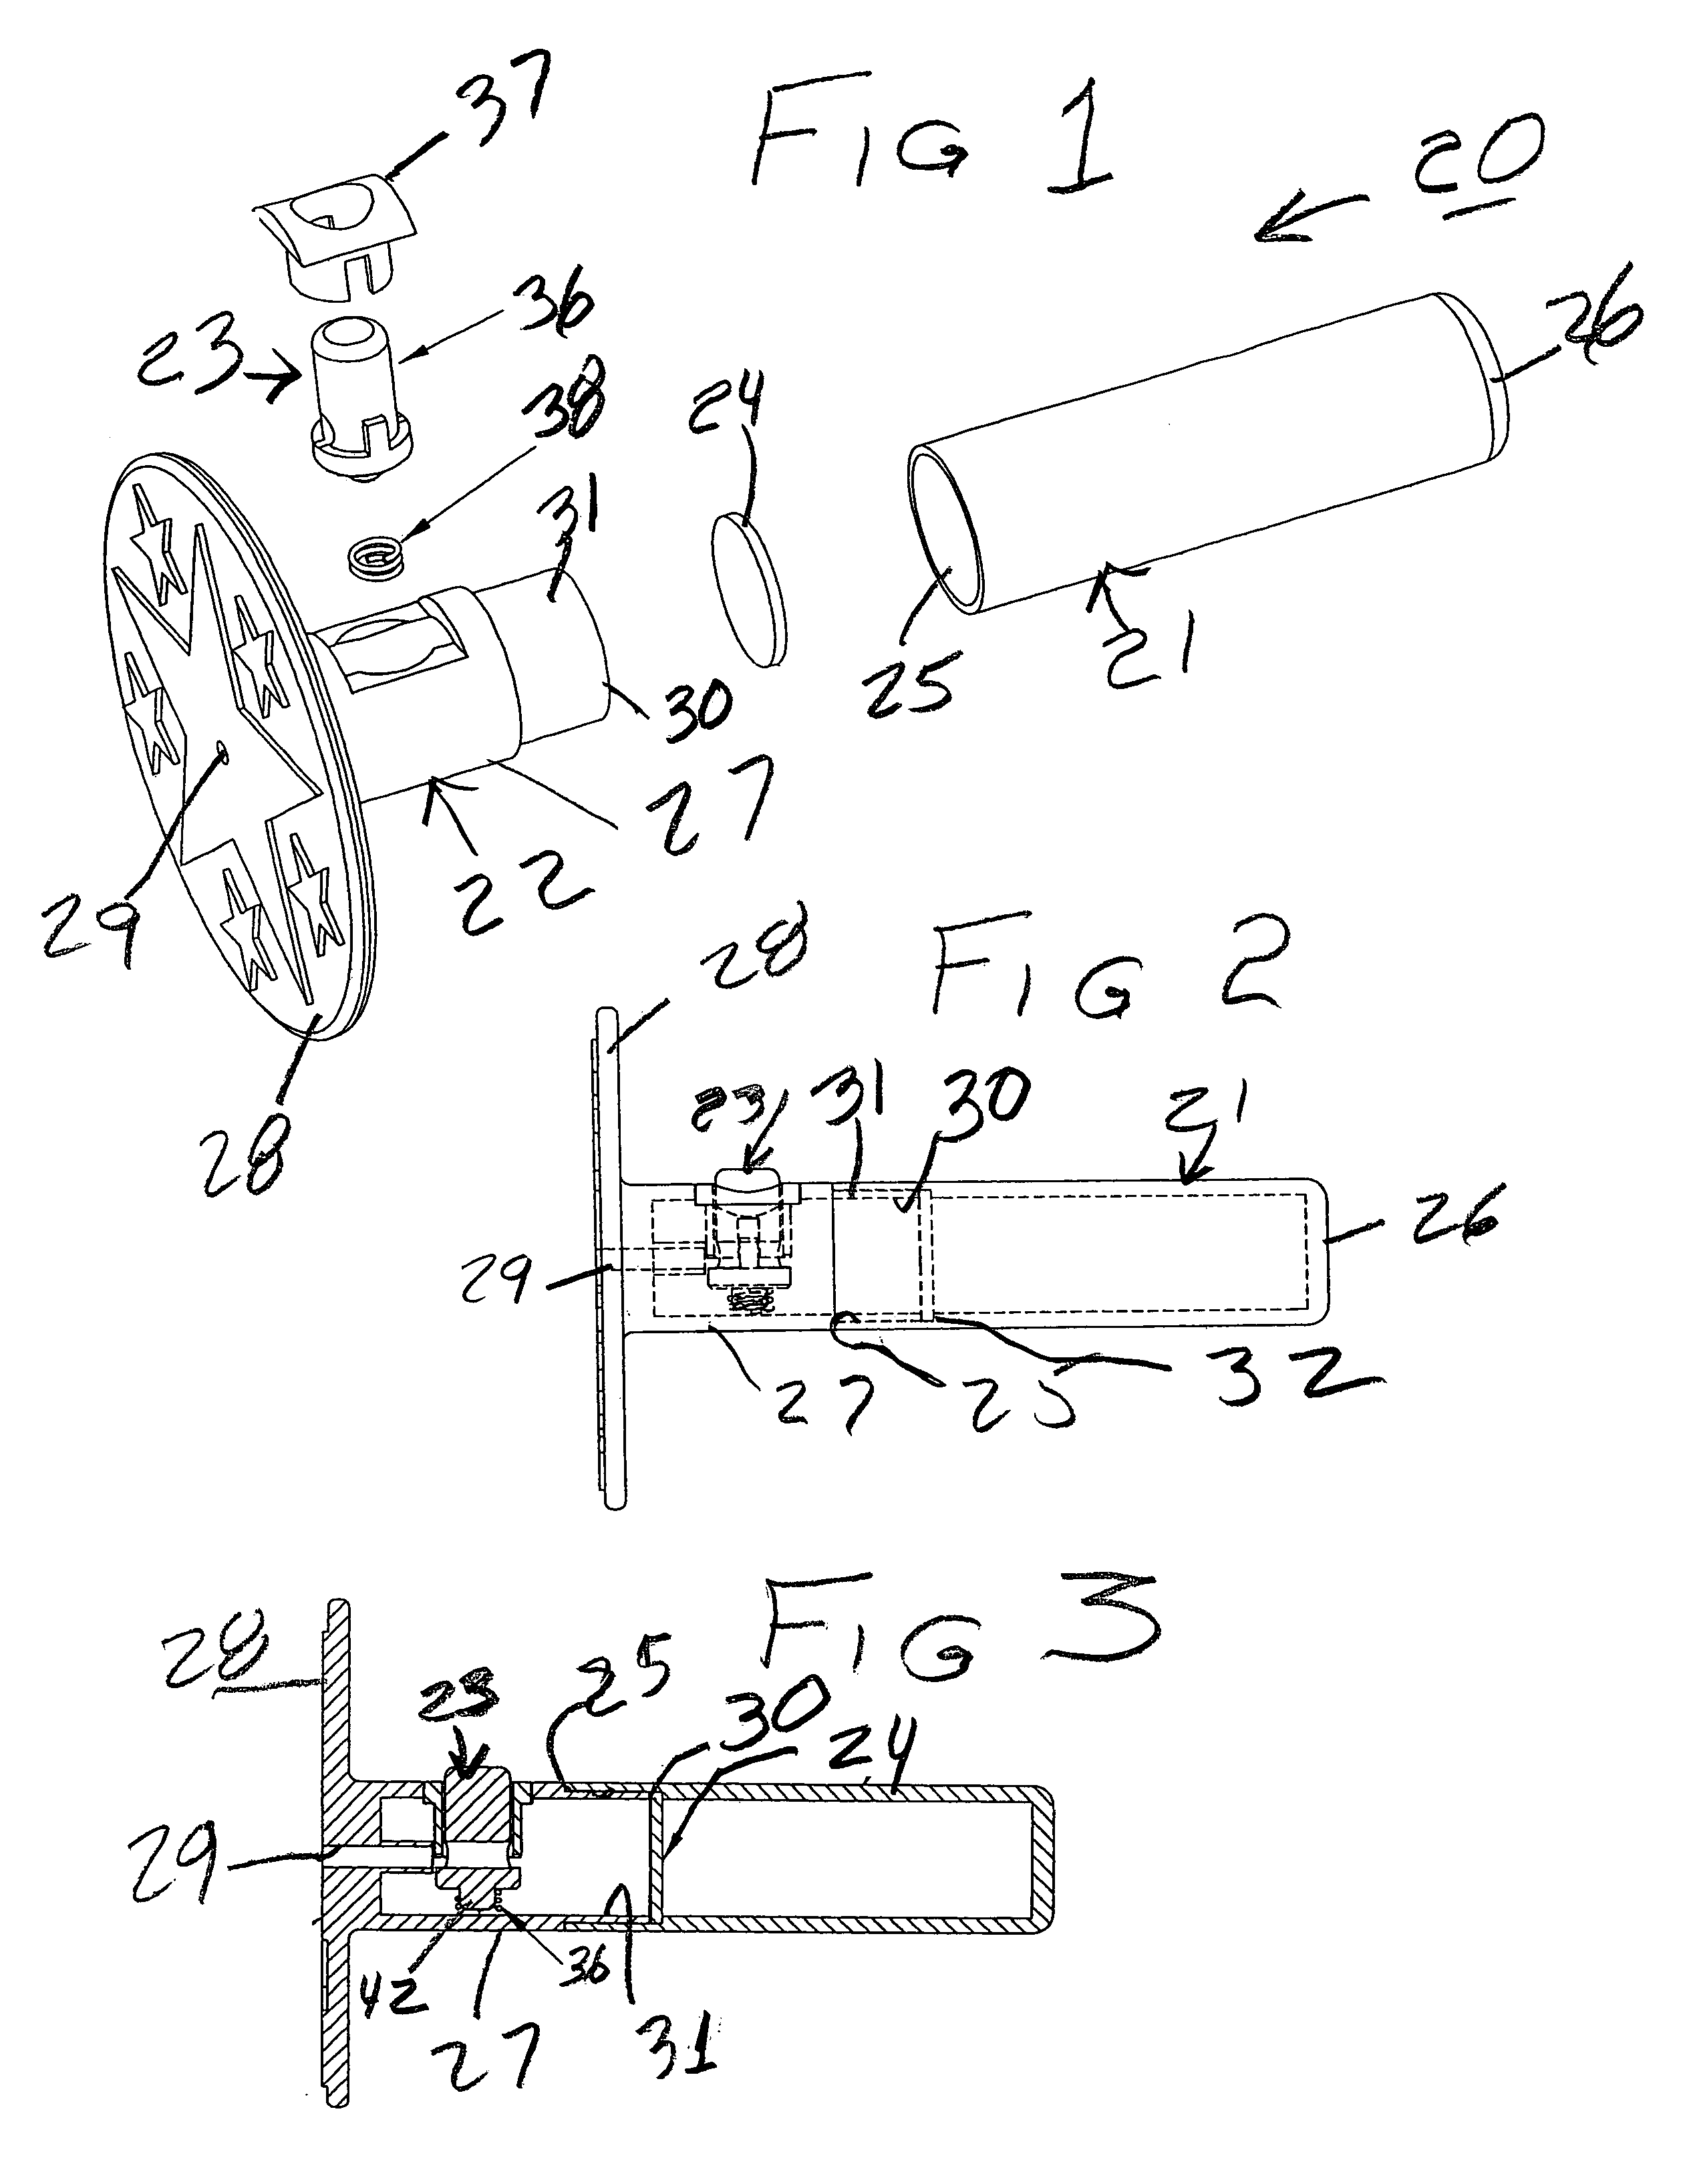 Reusable holding system for pyrotechnic, shaft bearing devices